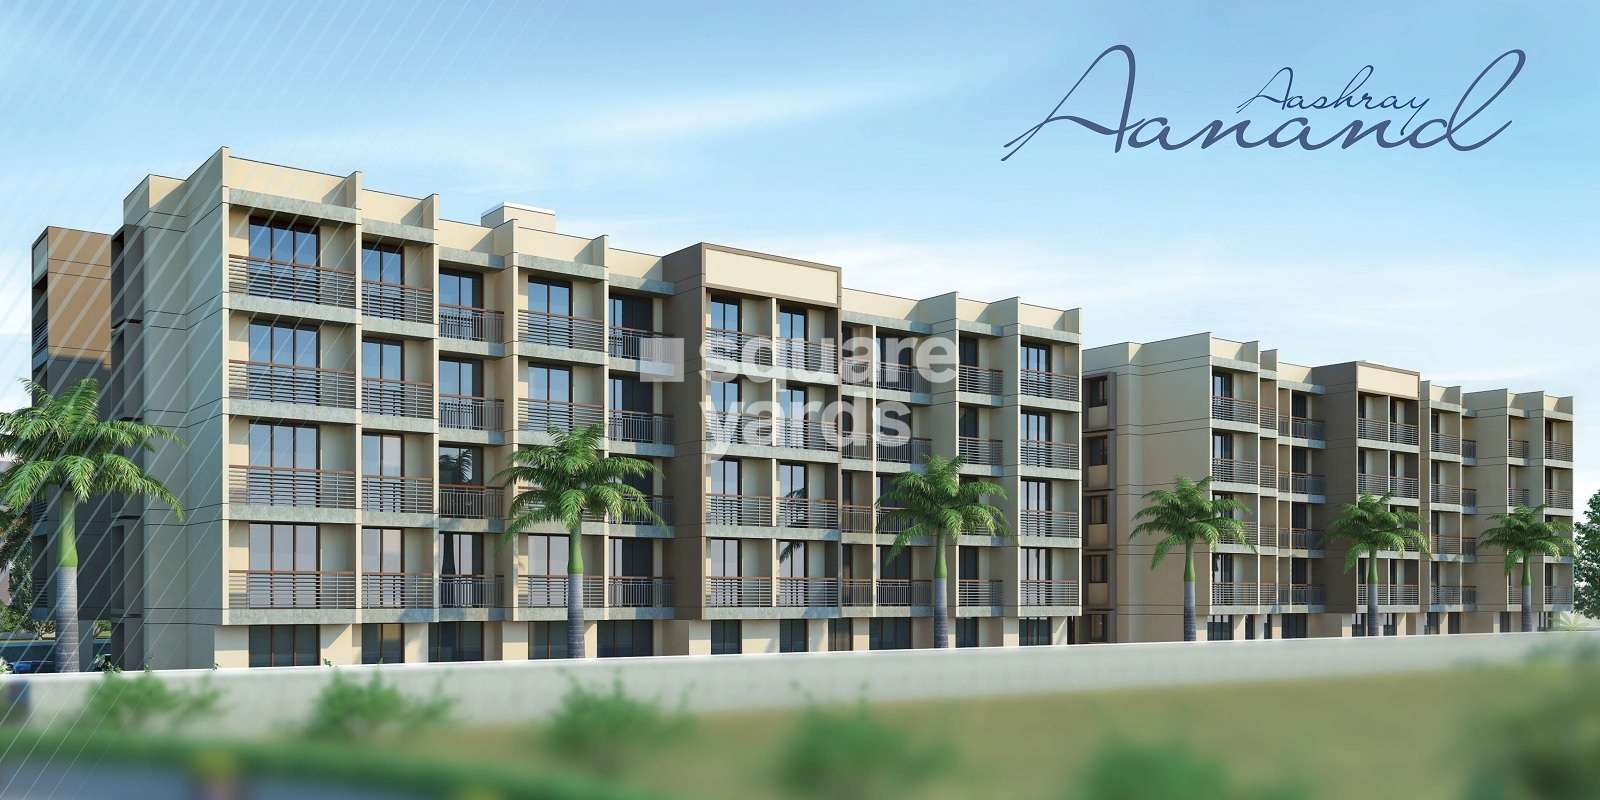 dream aashray aanand phase ii project tower view1 8542